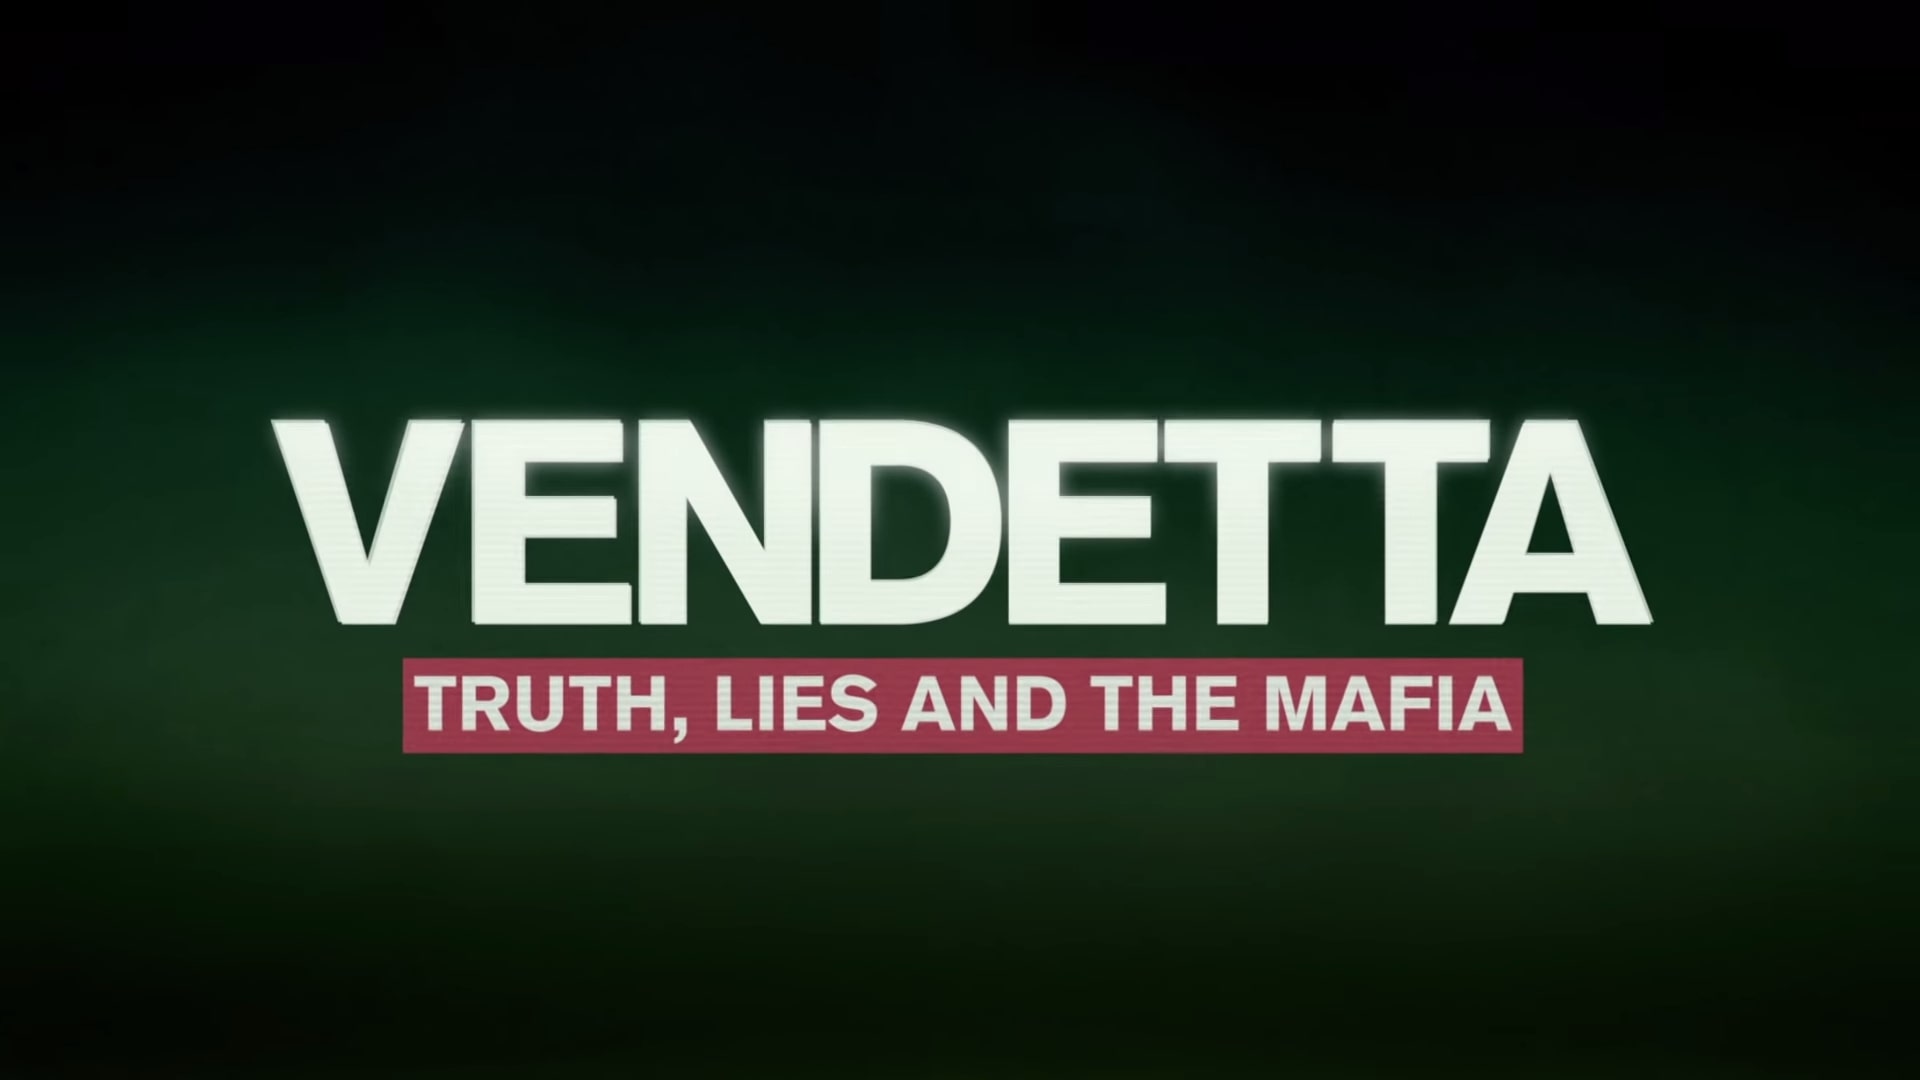 Netflix Vendetta Truth Lies And The Mafia Trailer, Coming to Netflix in September 2021